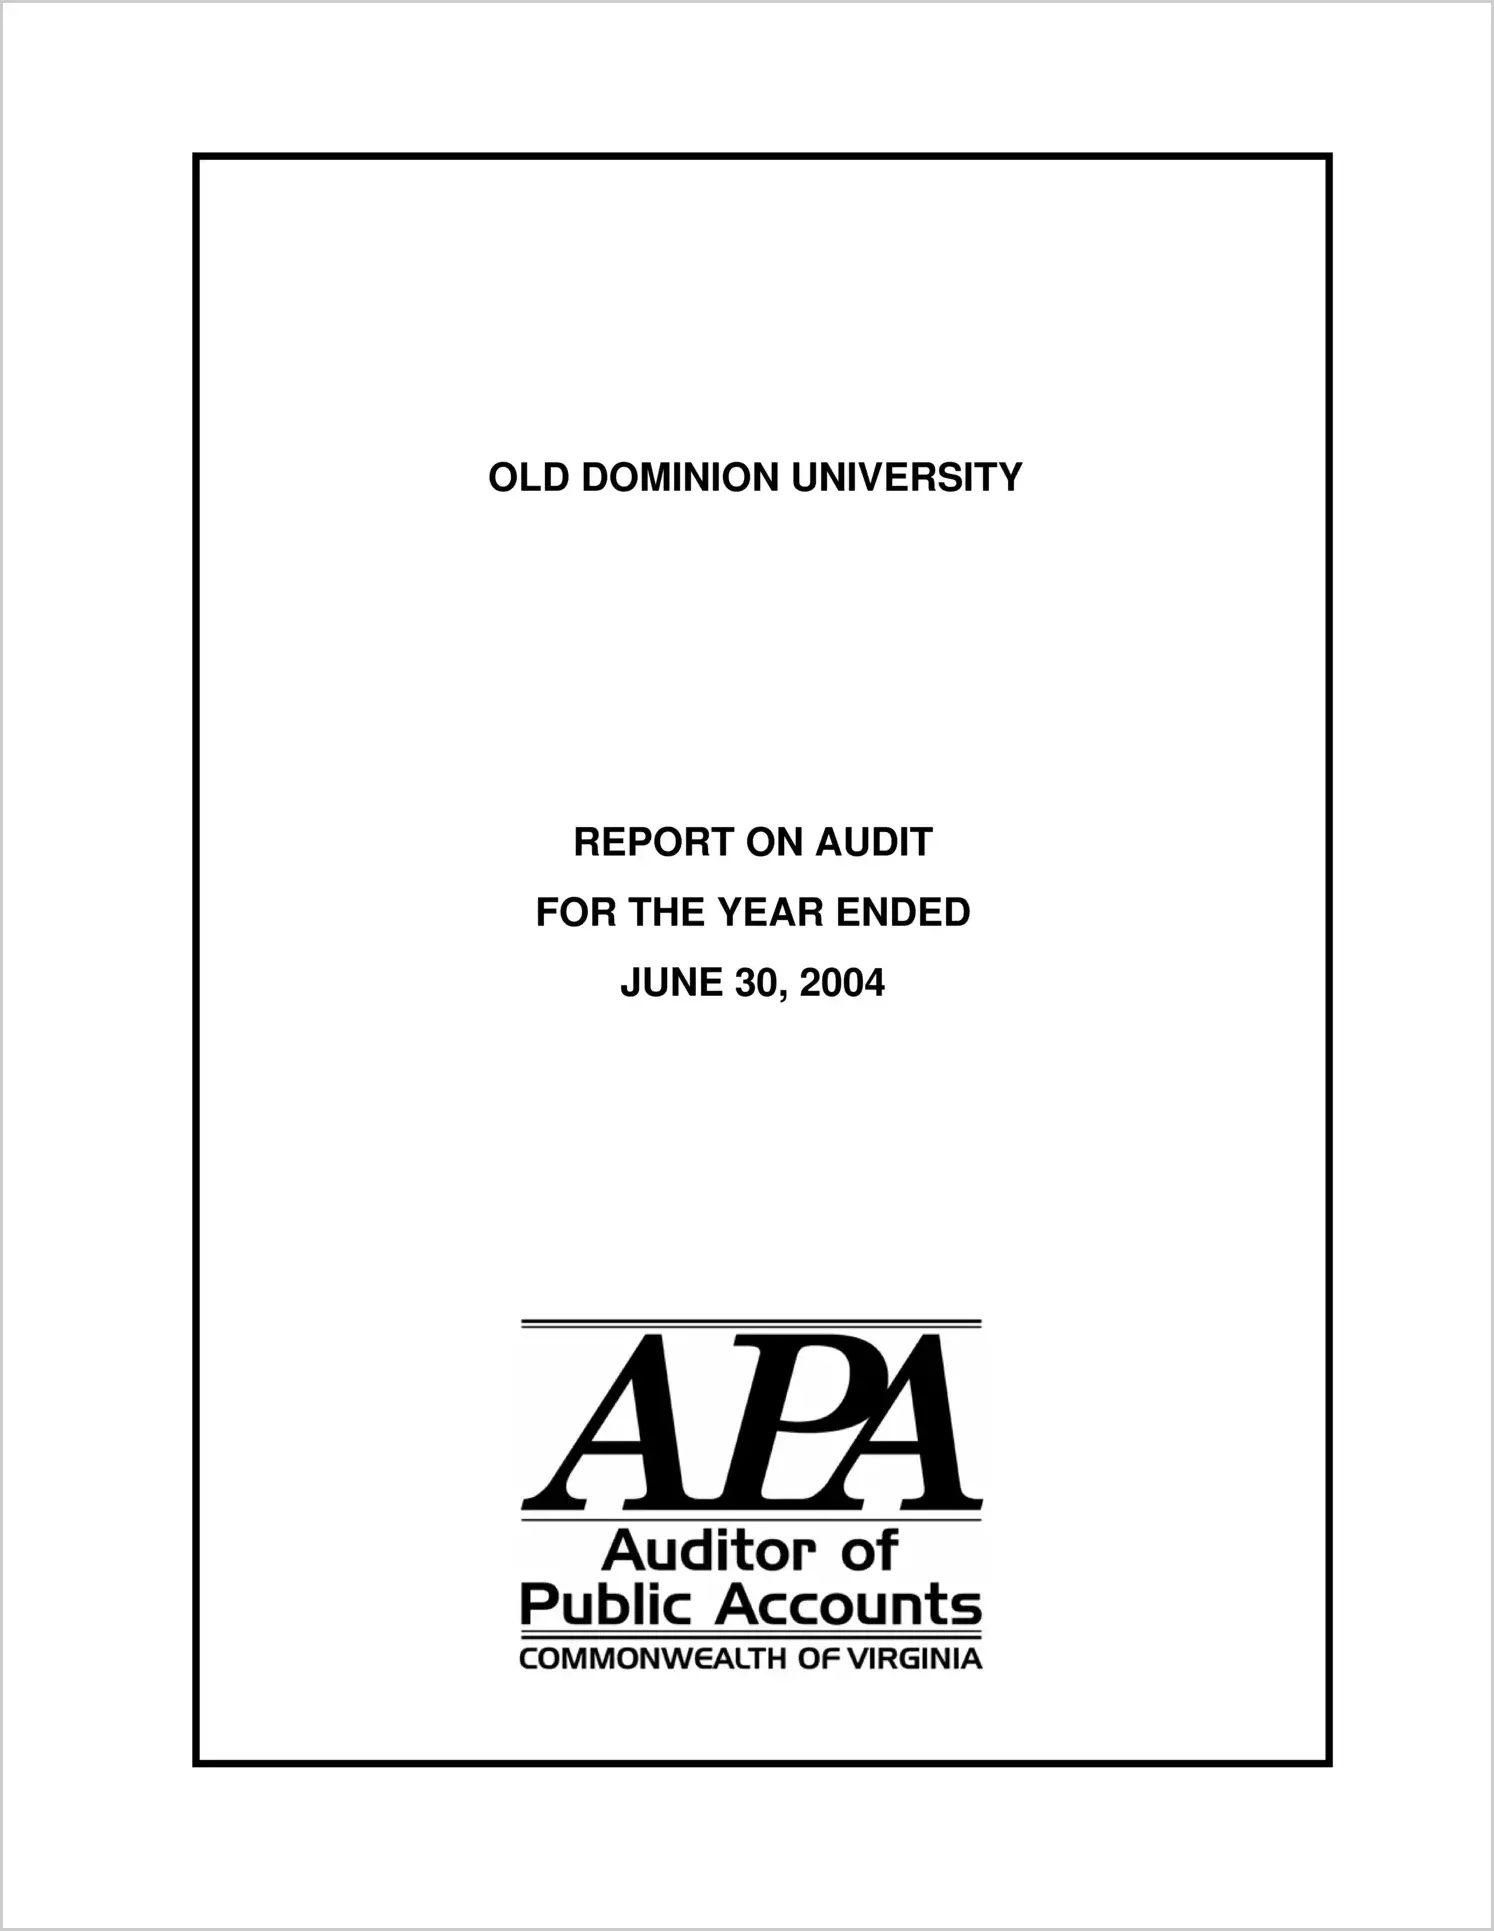 Old Dominion University for the year ended June 30, 2004